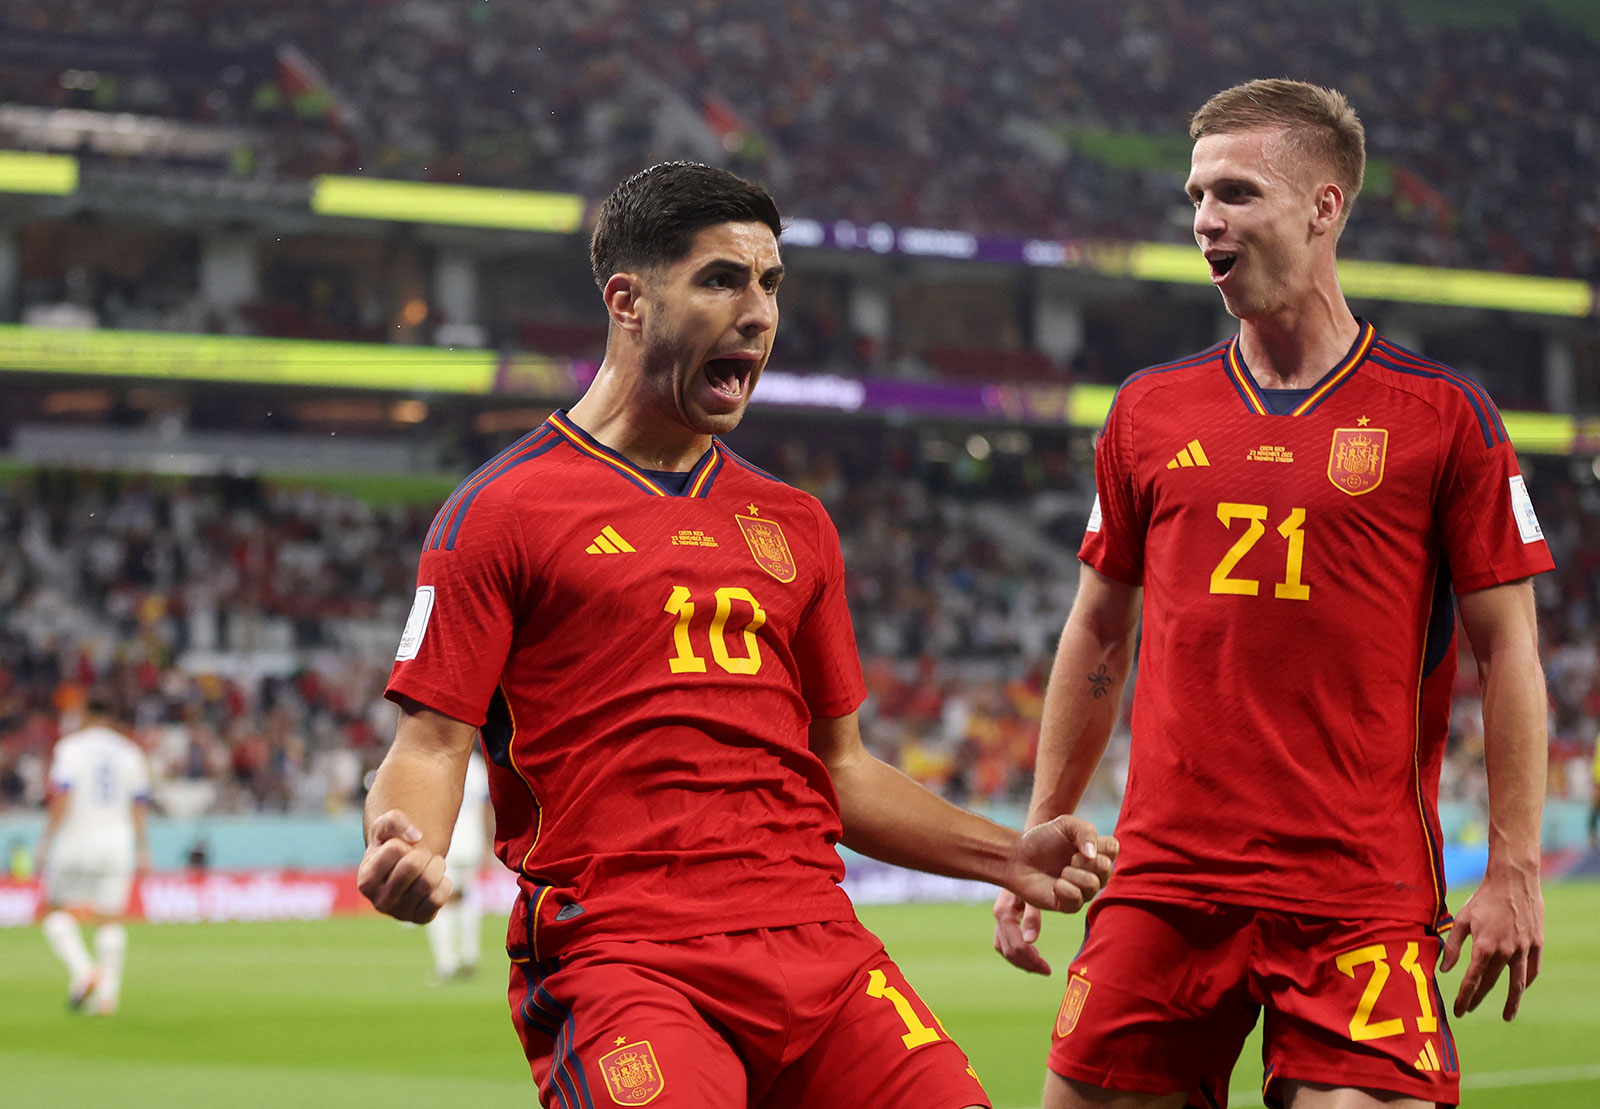 Spain's Marco Asensio, left, celebrates scoring their second goal with Dani Olmo during a match against Costa Rica on November 23.